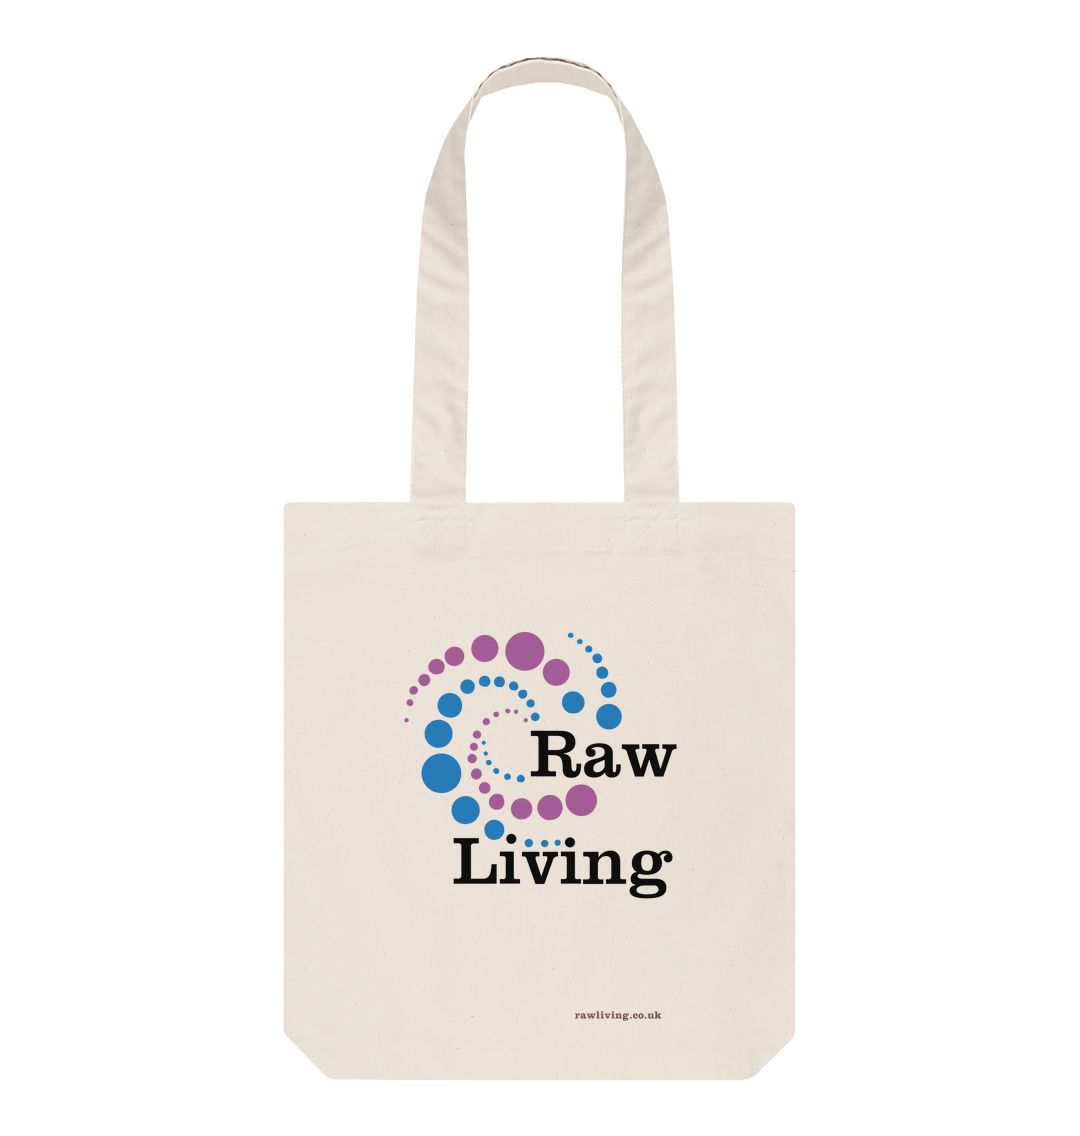 Natural Raw Living Organic Cotton Tote Bag - Logo | Organic Cotton Tote Bag. Twill Weave (170gsm). 37 x 42 cm (7cm gusset.) Made in India / Designed on the Isle of Wight. Wash Cool, Hang Dry.